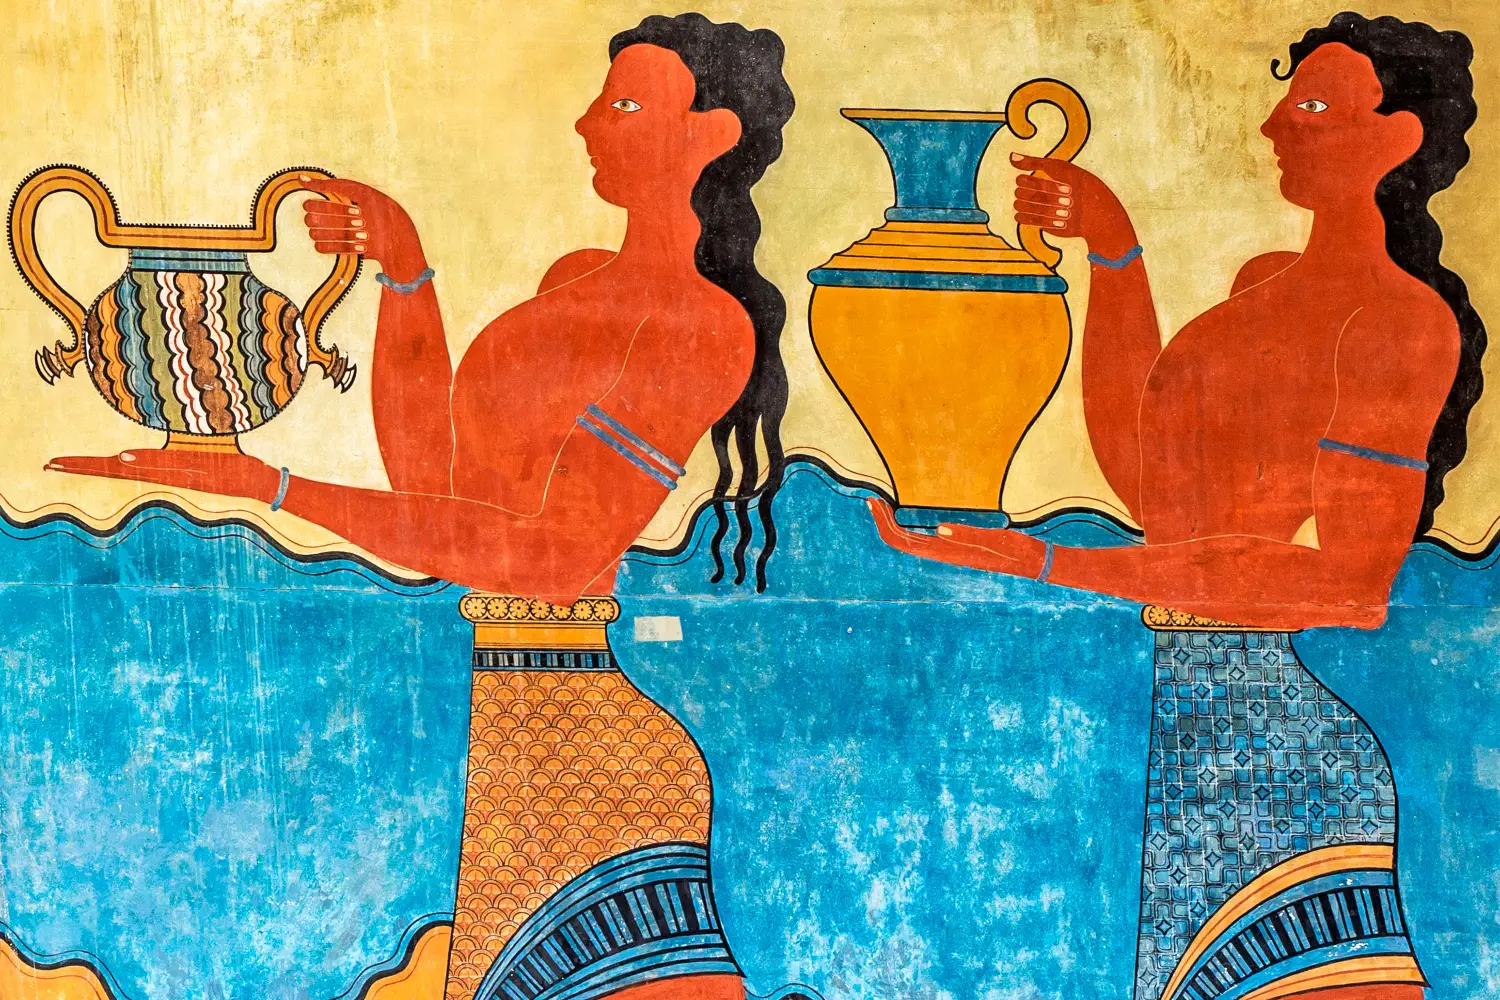 Ferry to Heraklion - Detail of the Procession Fresco at Knossos Palace in Crete, Greece.